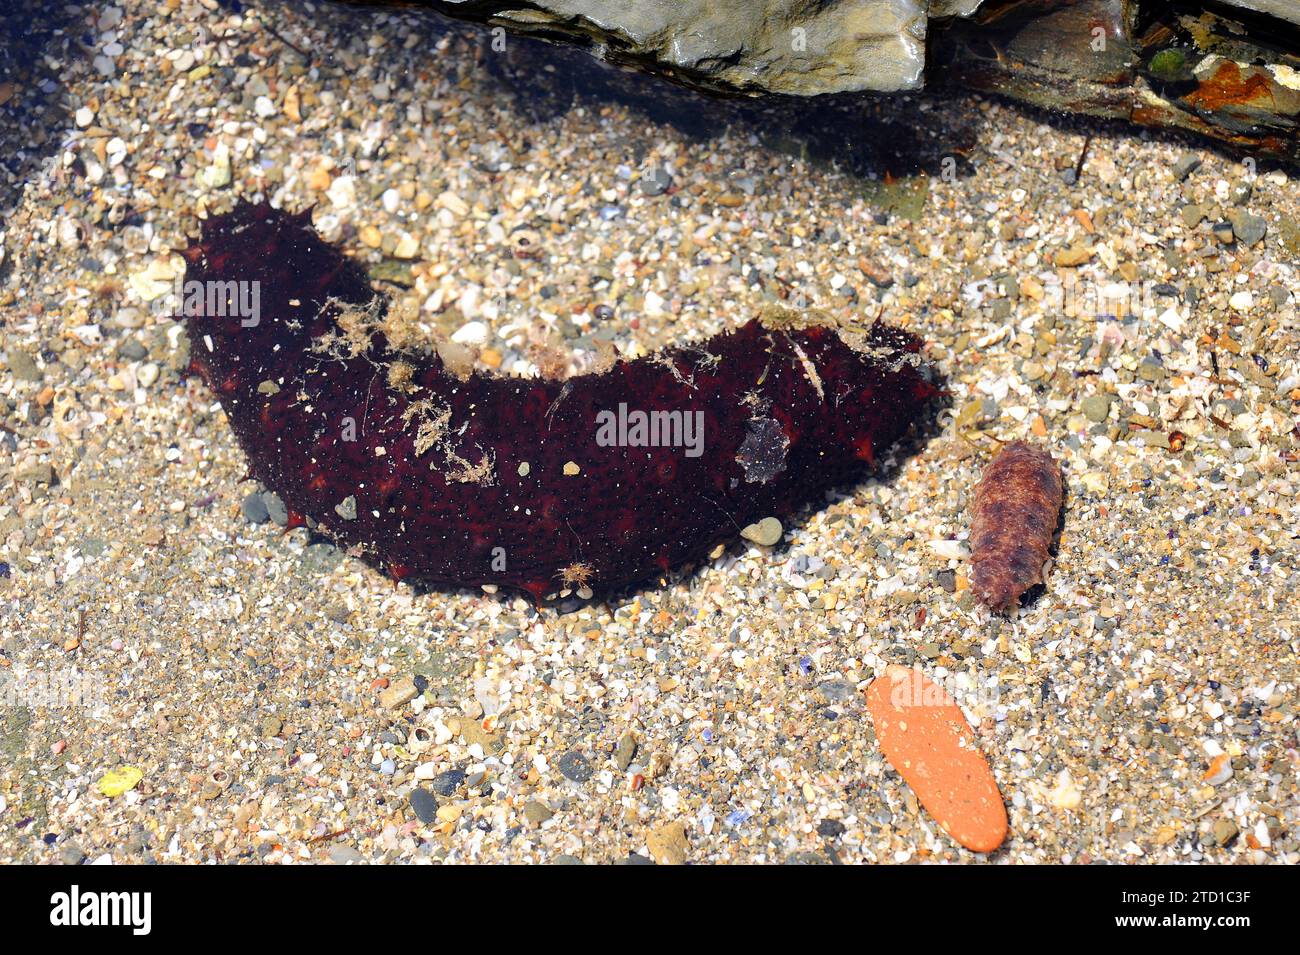 Tubular sea cucumber (Holothuria tubulosa) is a species of sea cucumber feeds on detritus and plankton. Adult and young specimens. This photo was take Stock Photo